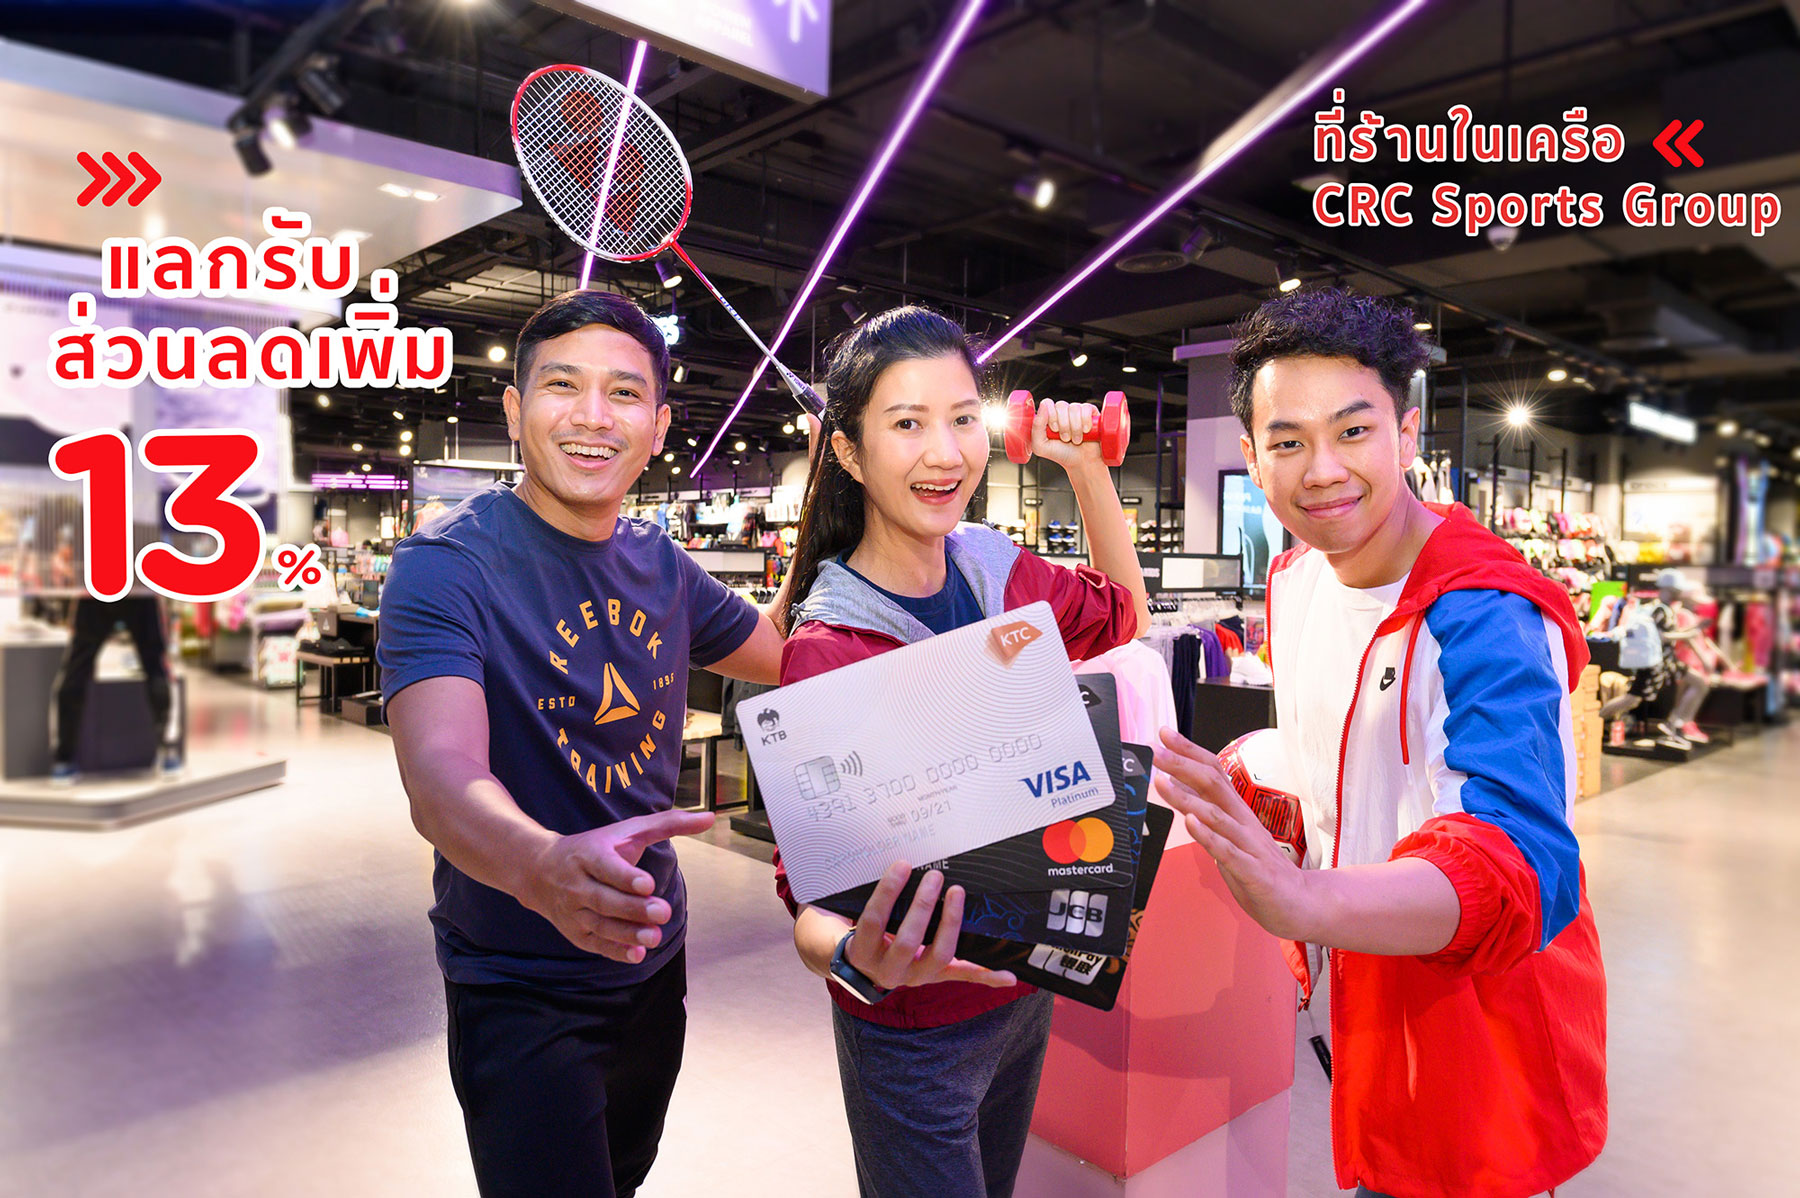 KTC pleases and invites fit cardmembers to shop for sports equipment under CRC Sports Group.